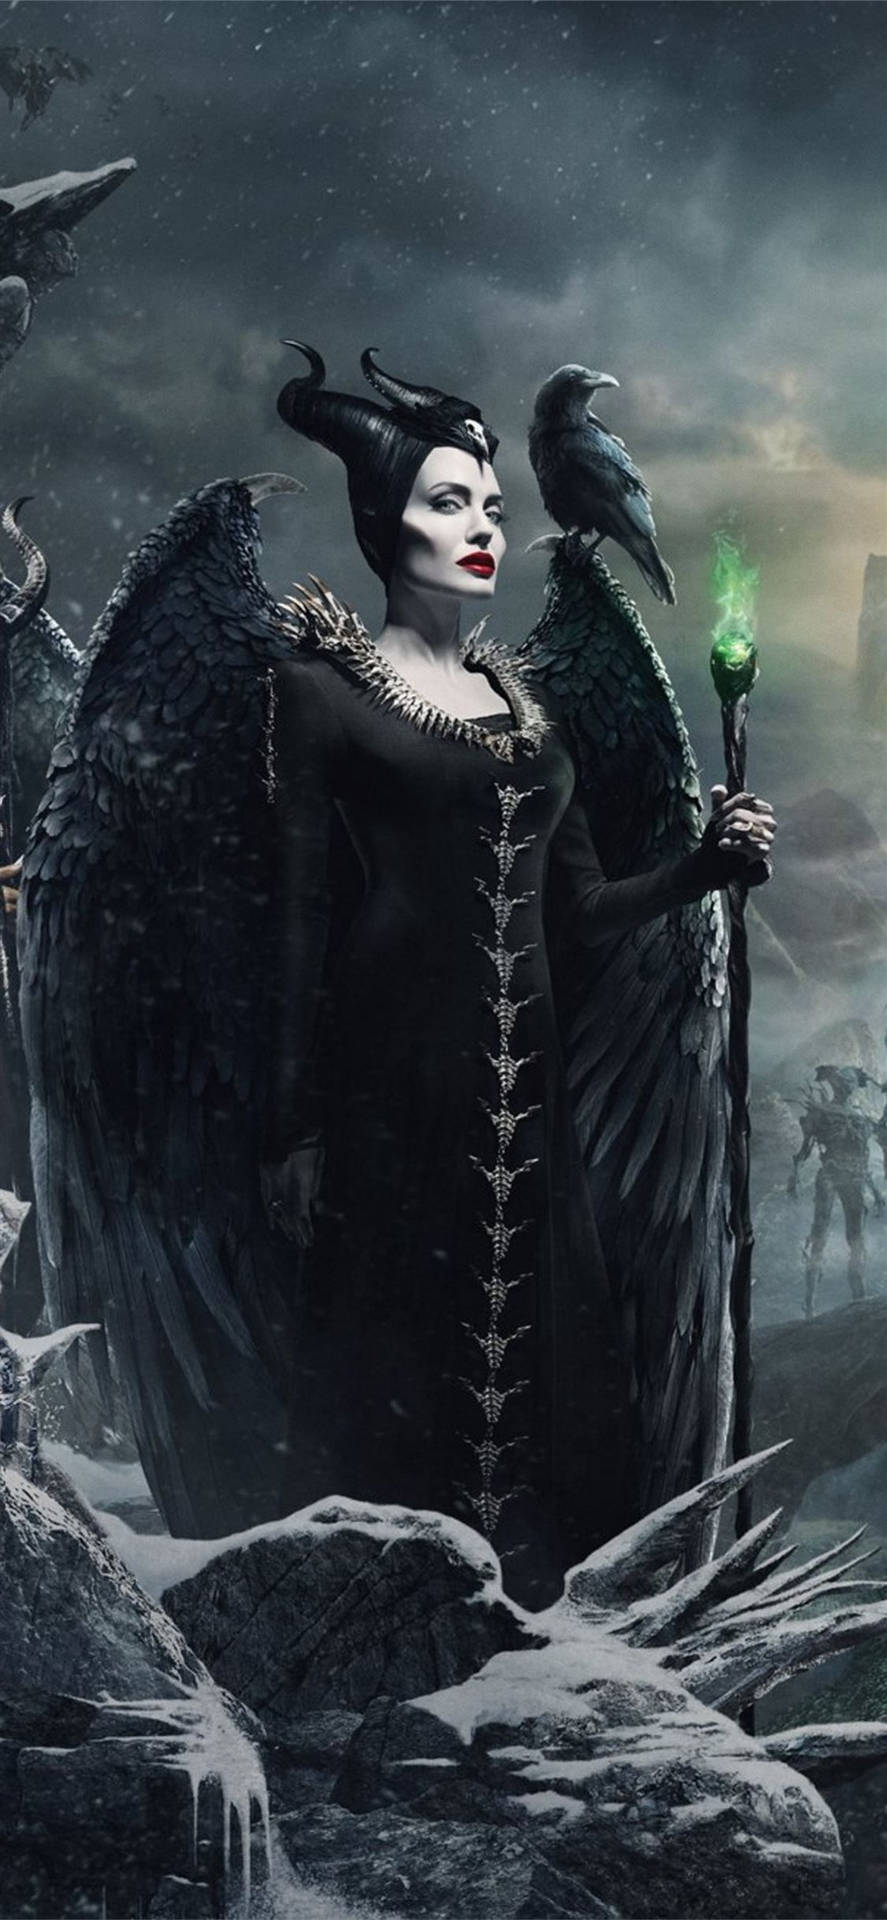 Menacing Maleficent With Crow Background